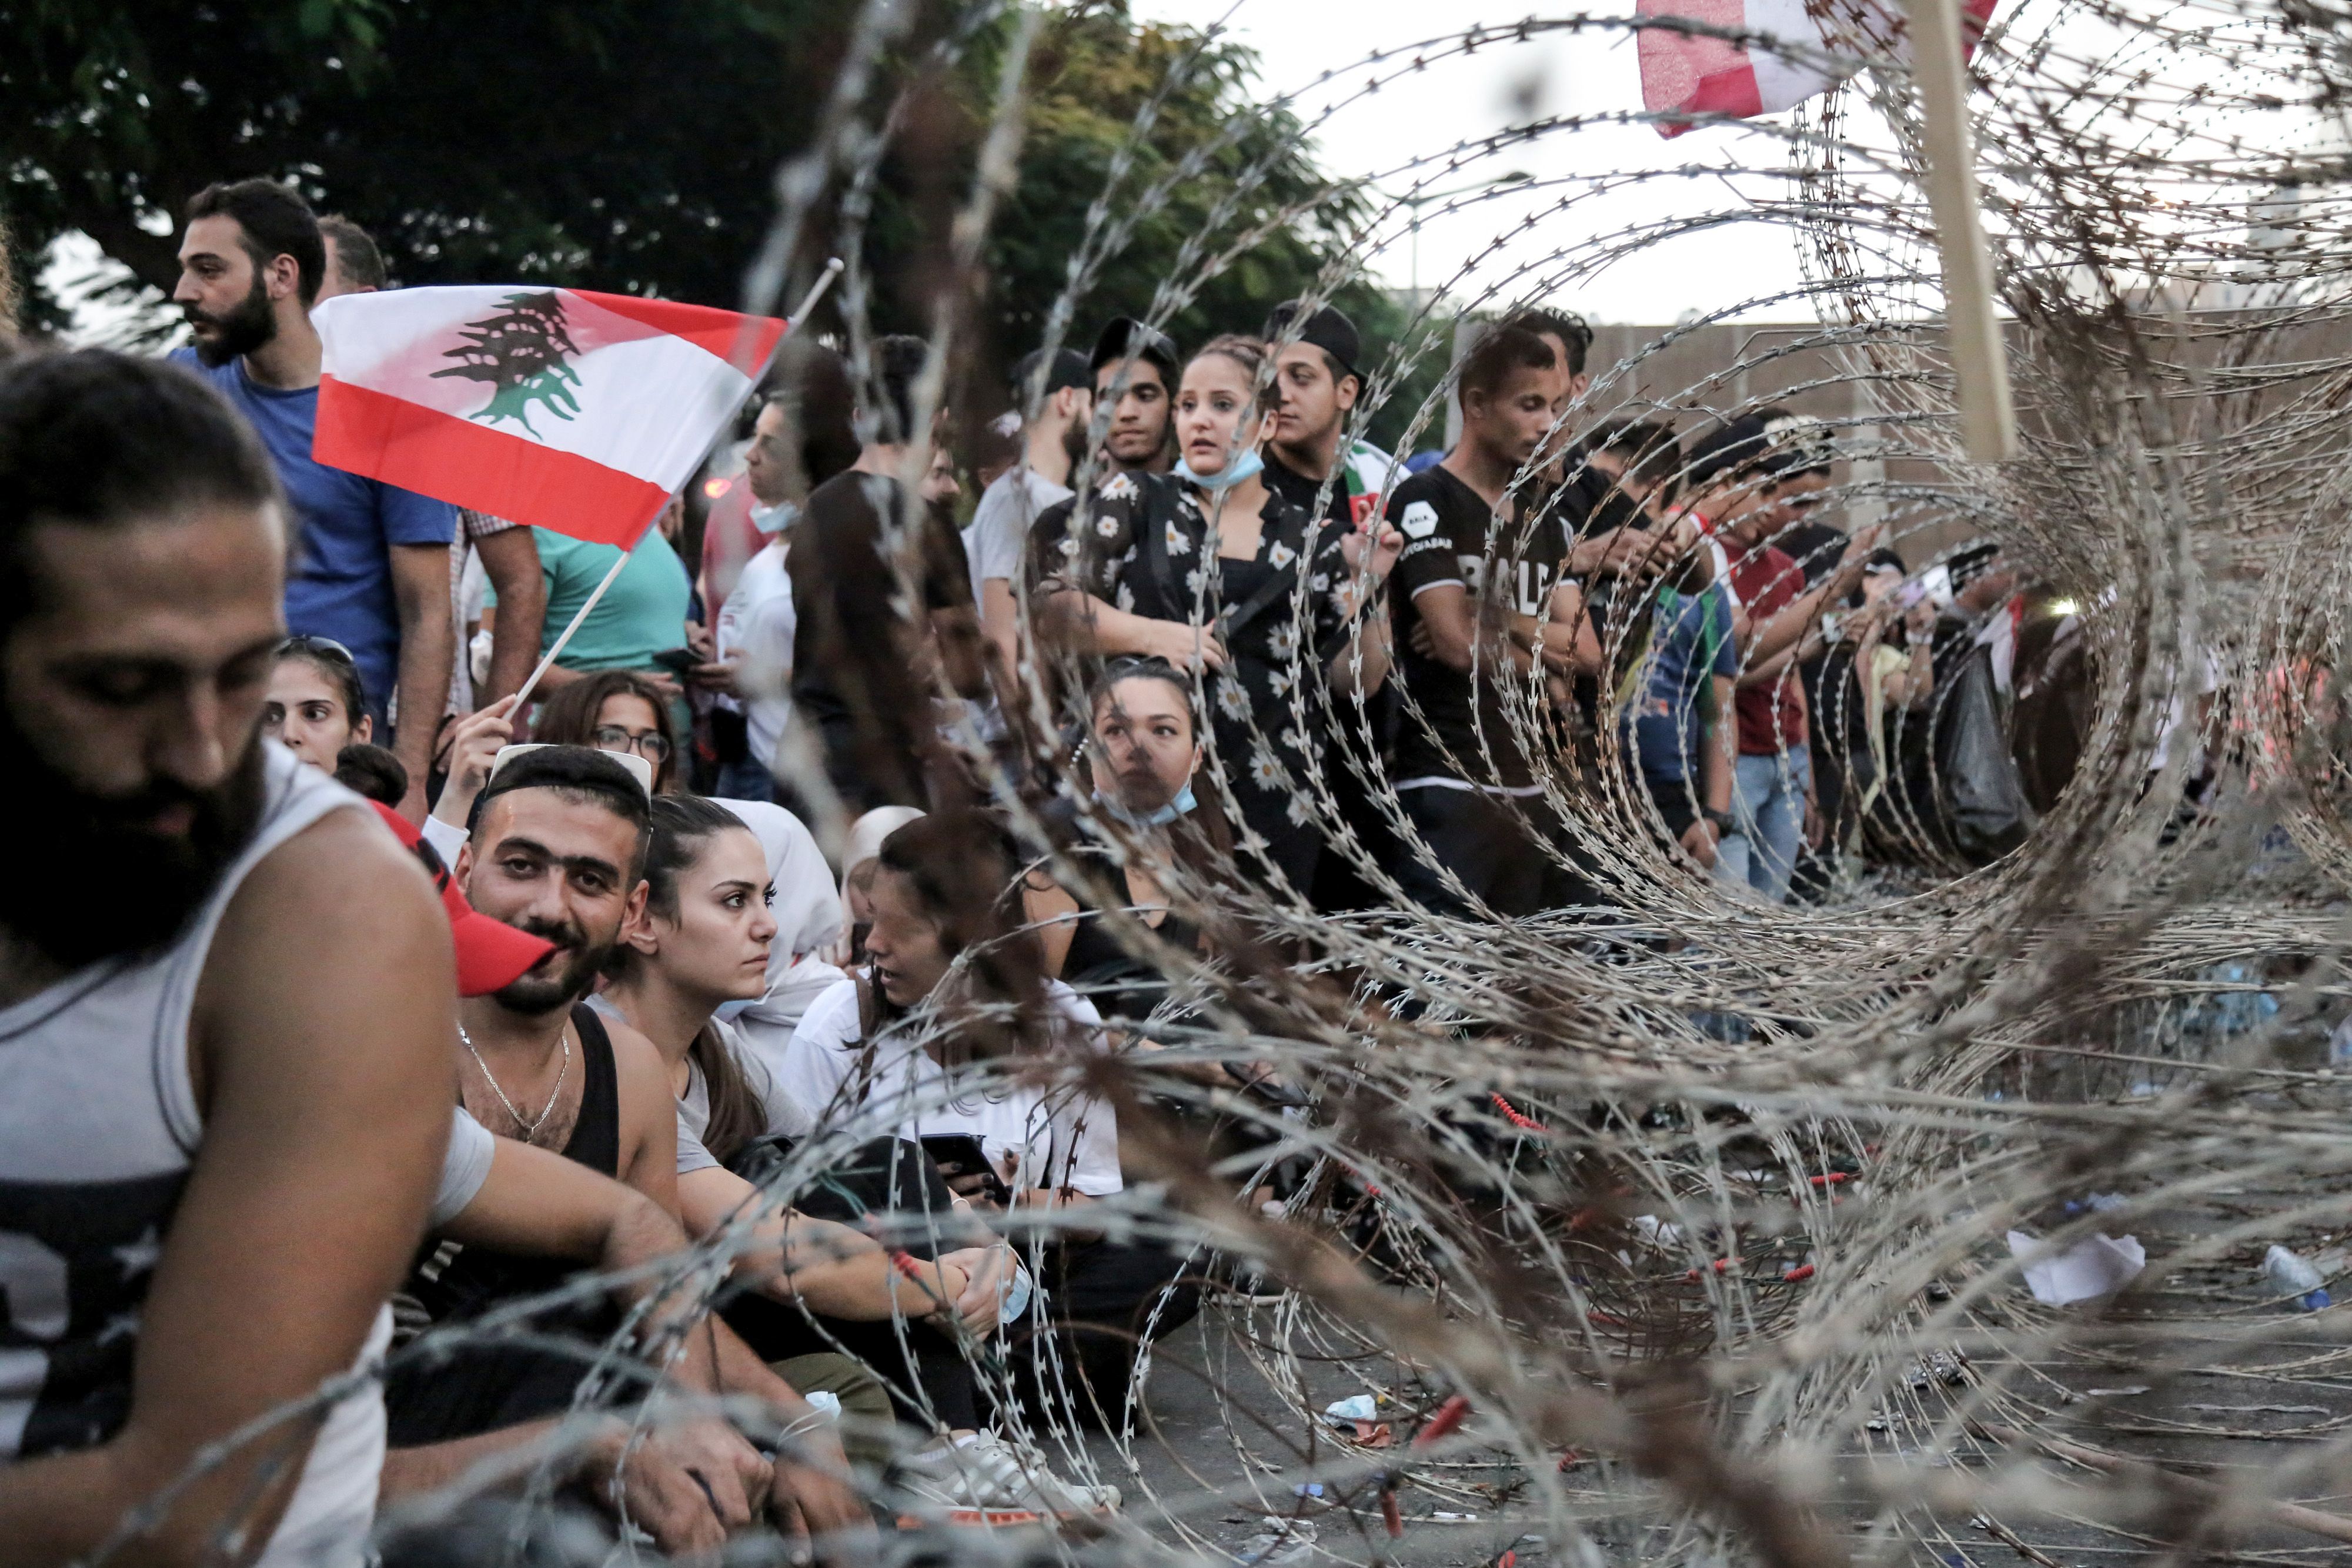 In this image, a line of people waving flags stand behind barbed wire fencing